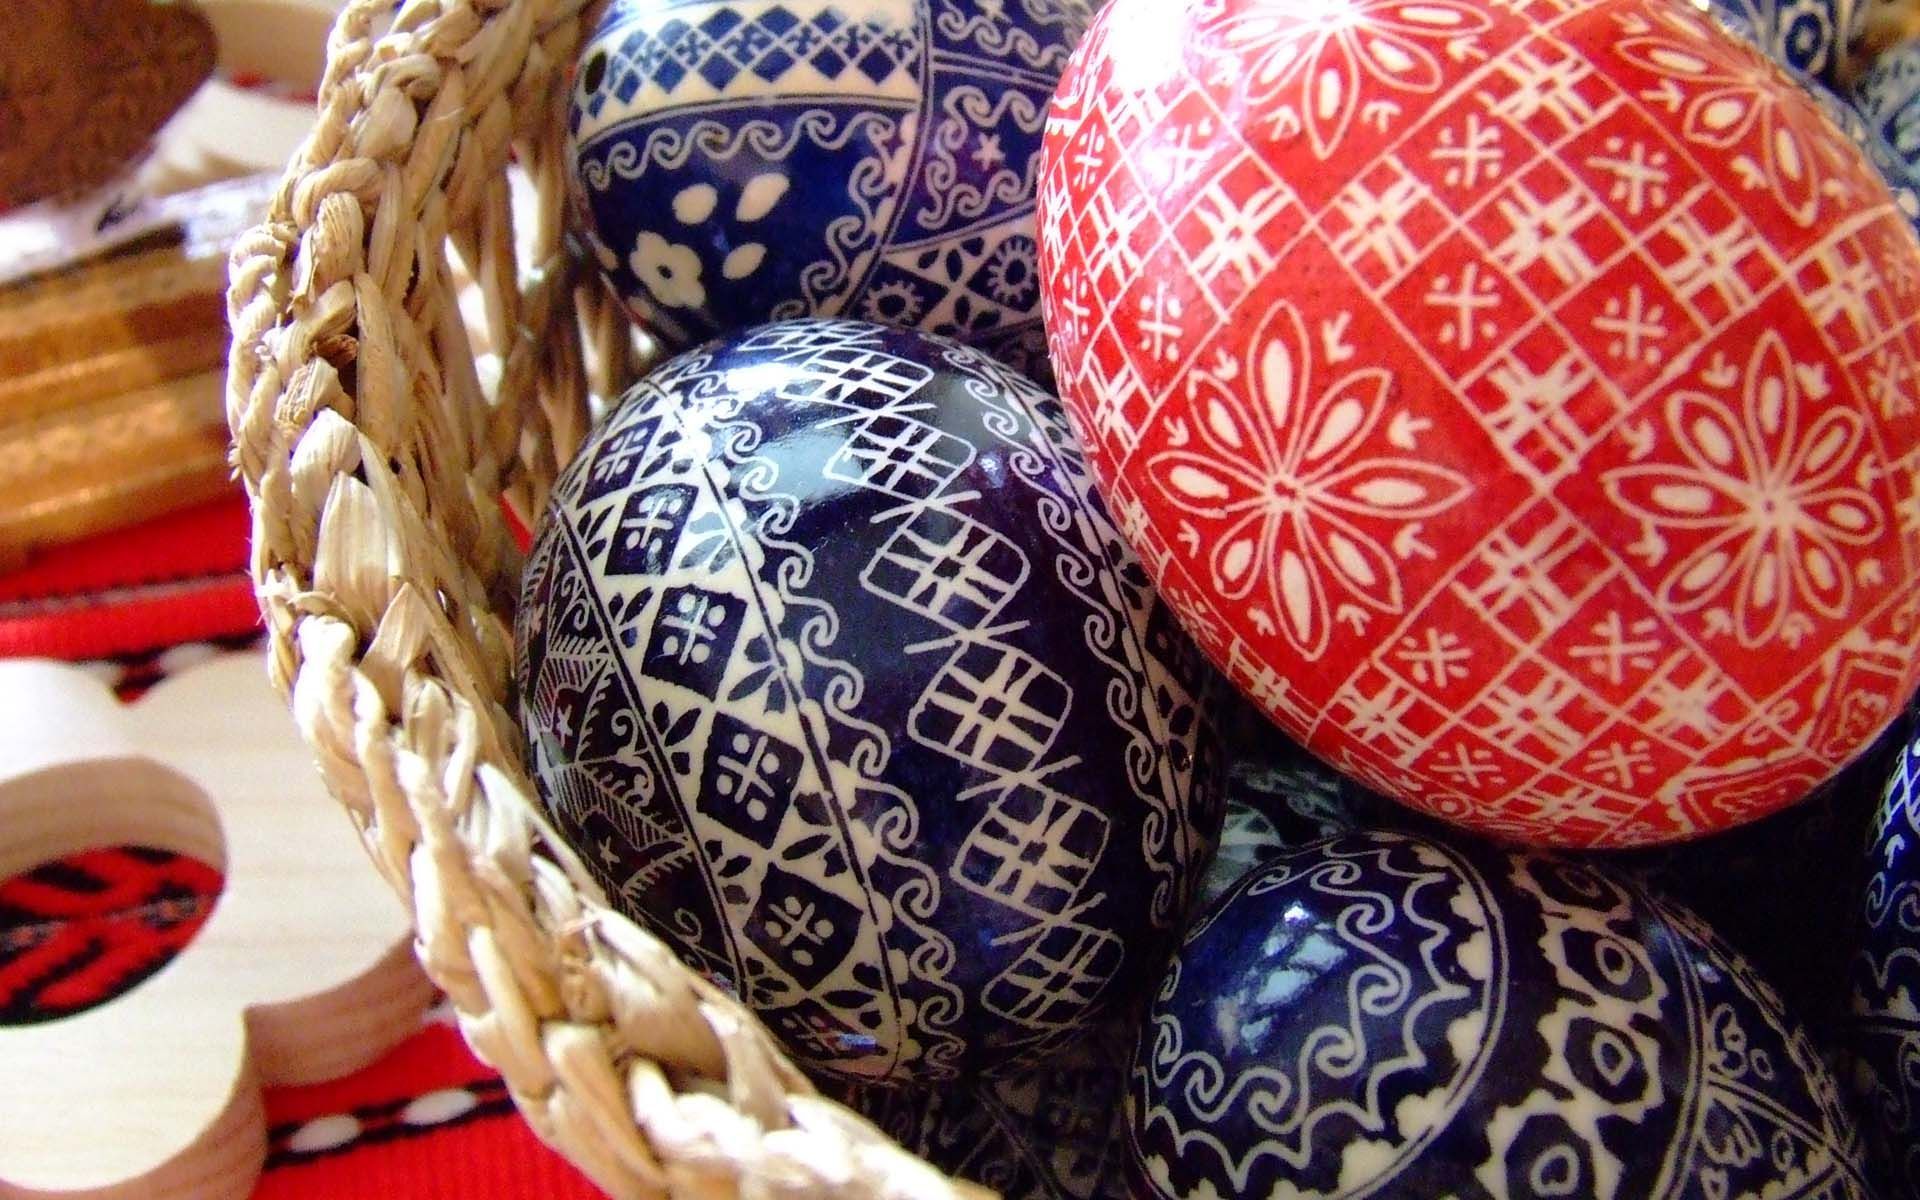 Hapy Easter The Blue And Red Easter Eggs Wallpaper 1920x1200 PC Wallpaper. Easter wallpaper, Easter eggs, Easter